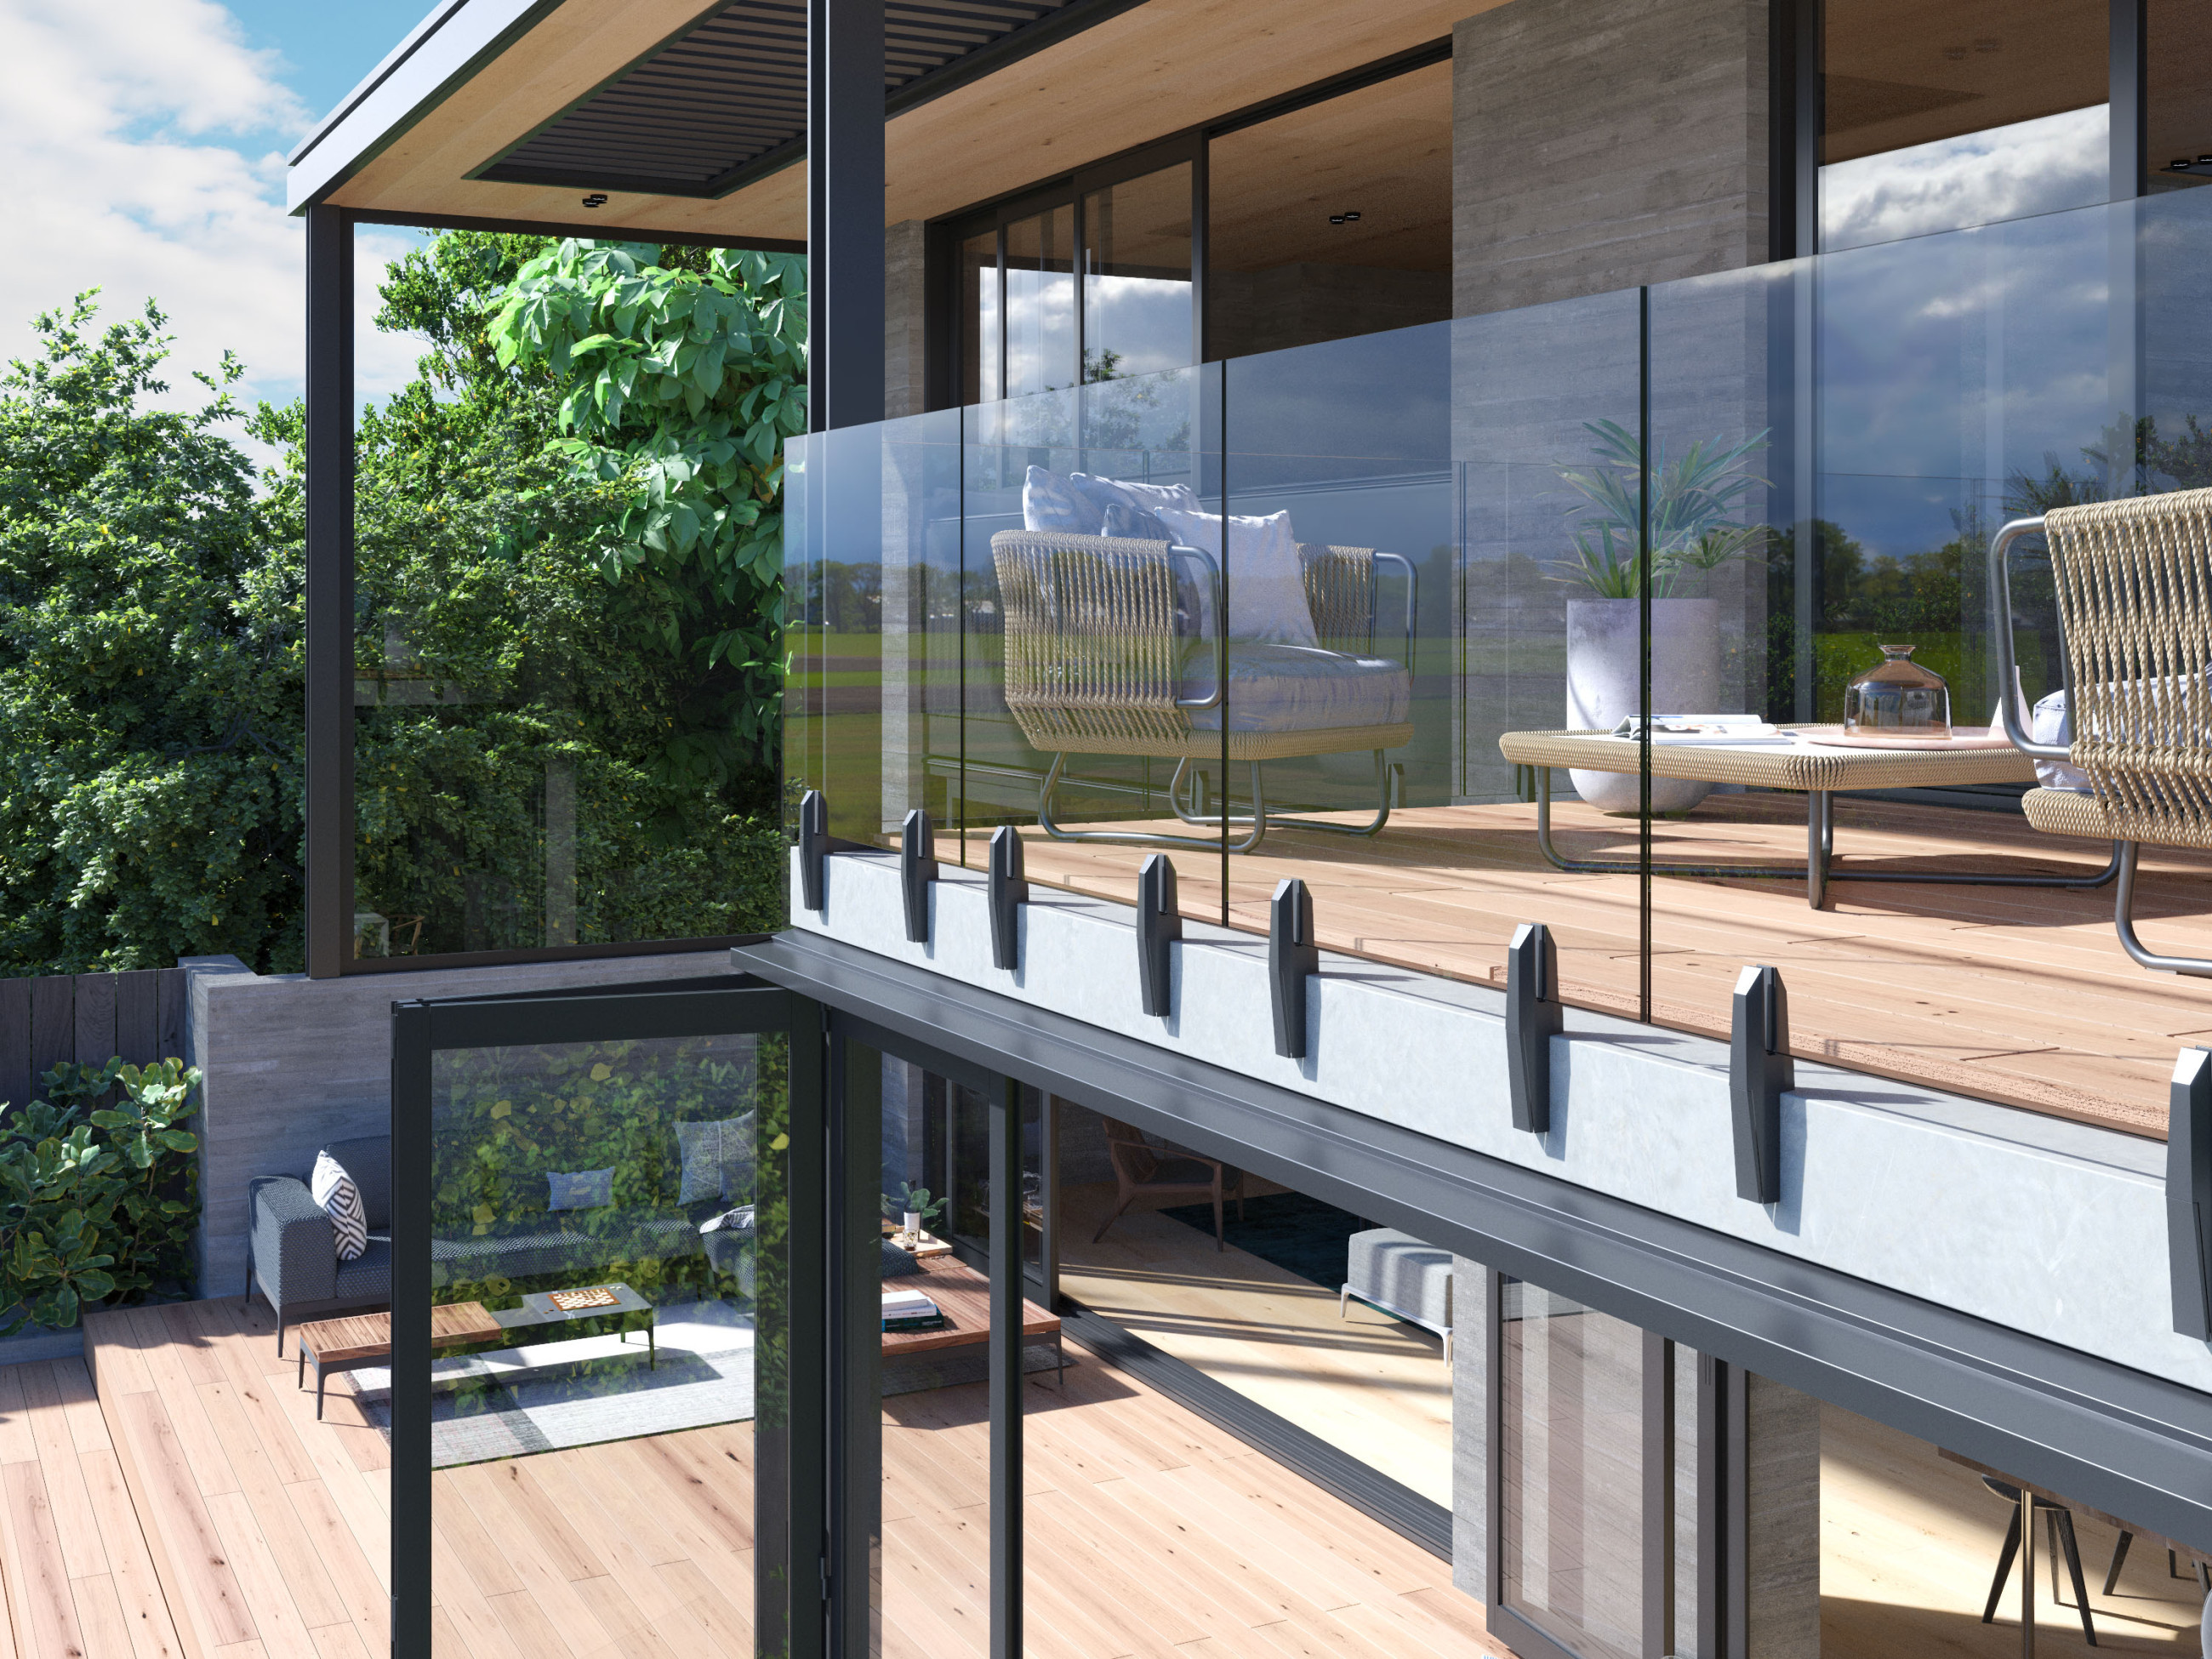 Stylish outdoor deck with a glass balustrade providing an unobstructed view of the serene landscape